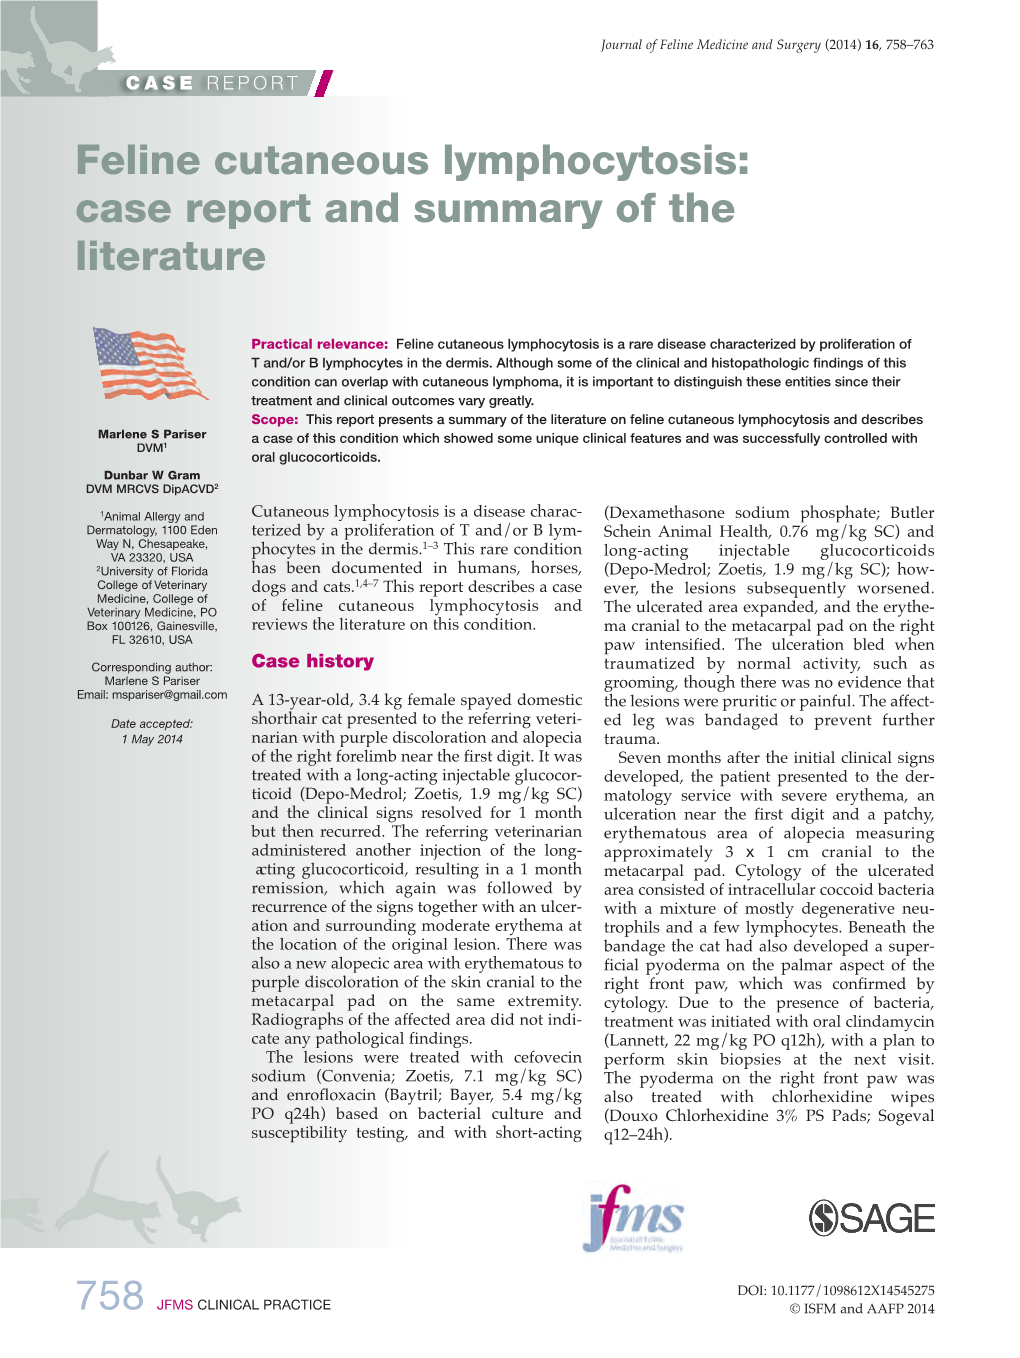 Feline Cutaneous Lymphocytosis: Case Report and Summary of the Literature